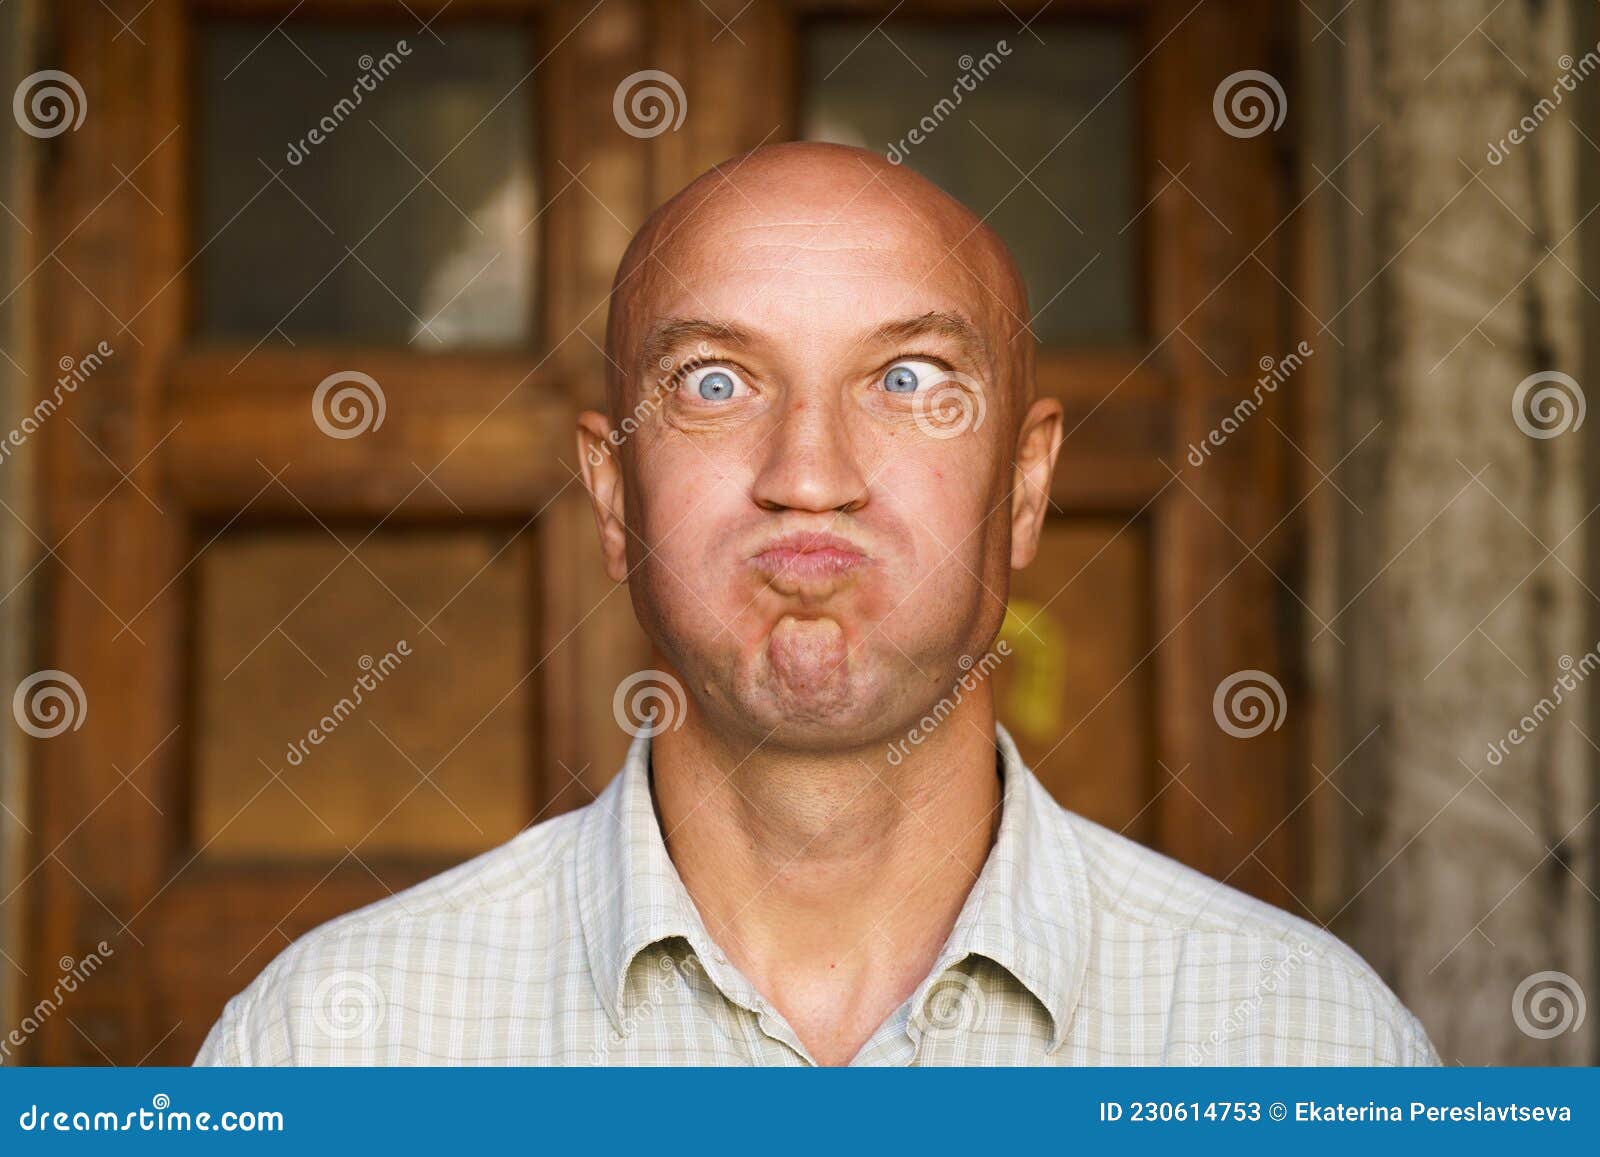 Portrait Of An Emotional Bald Guy With Blue Eyes Dressed In Light